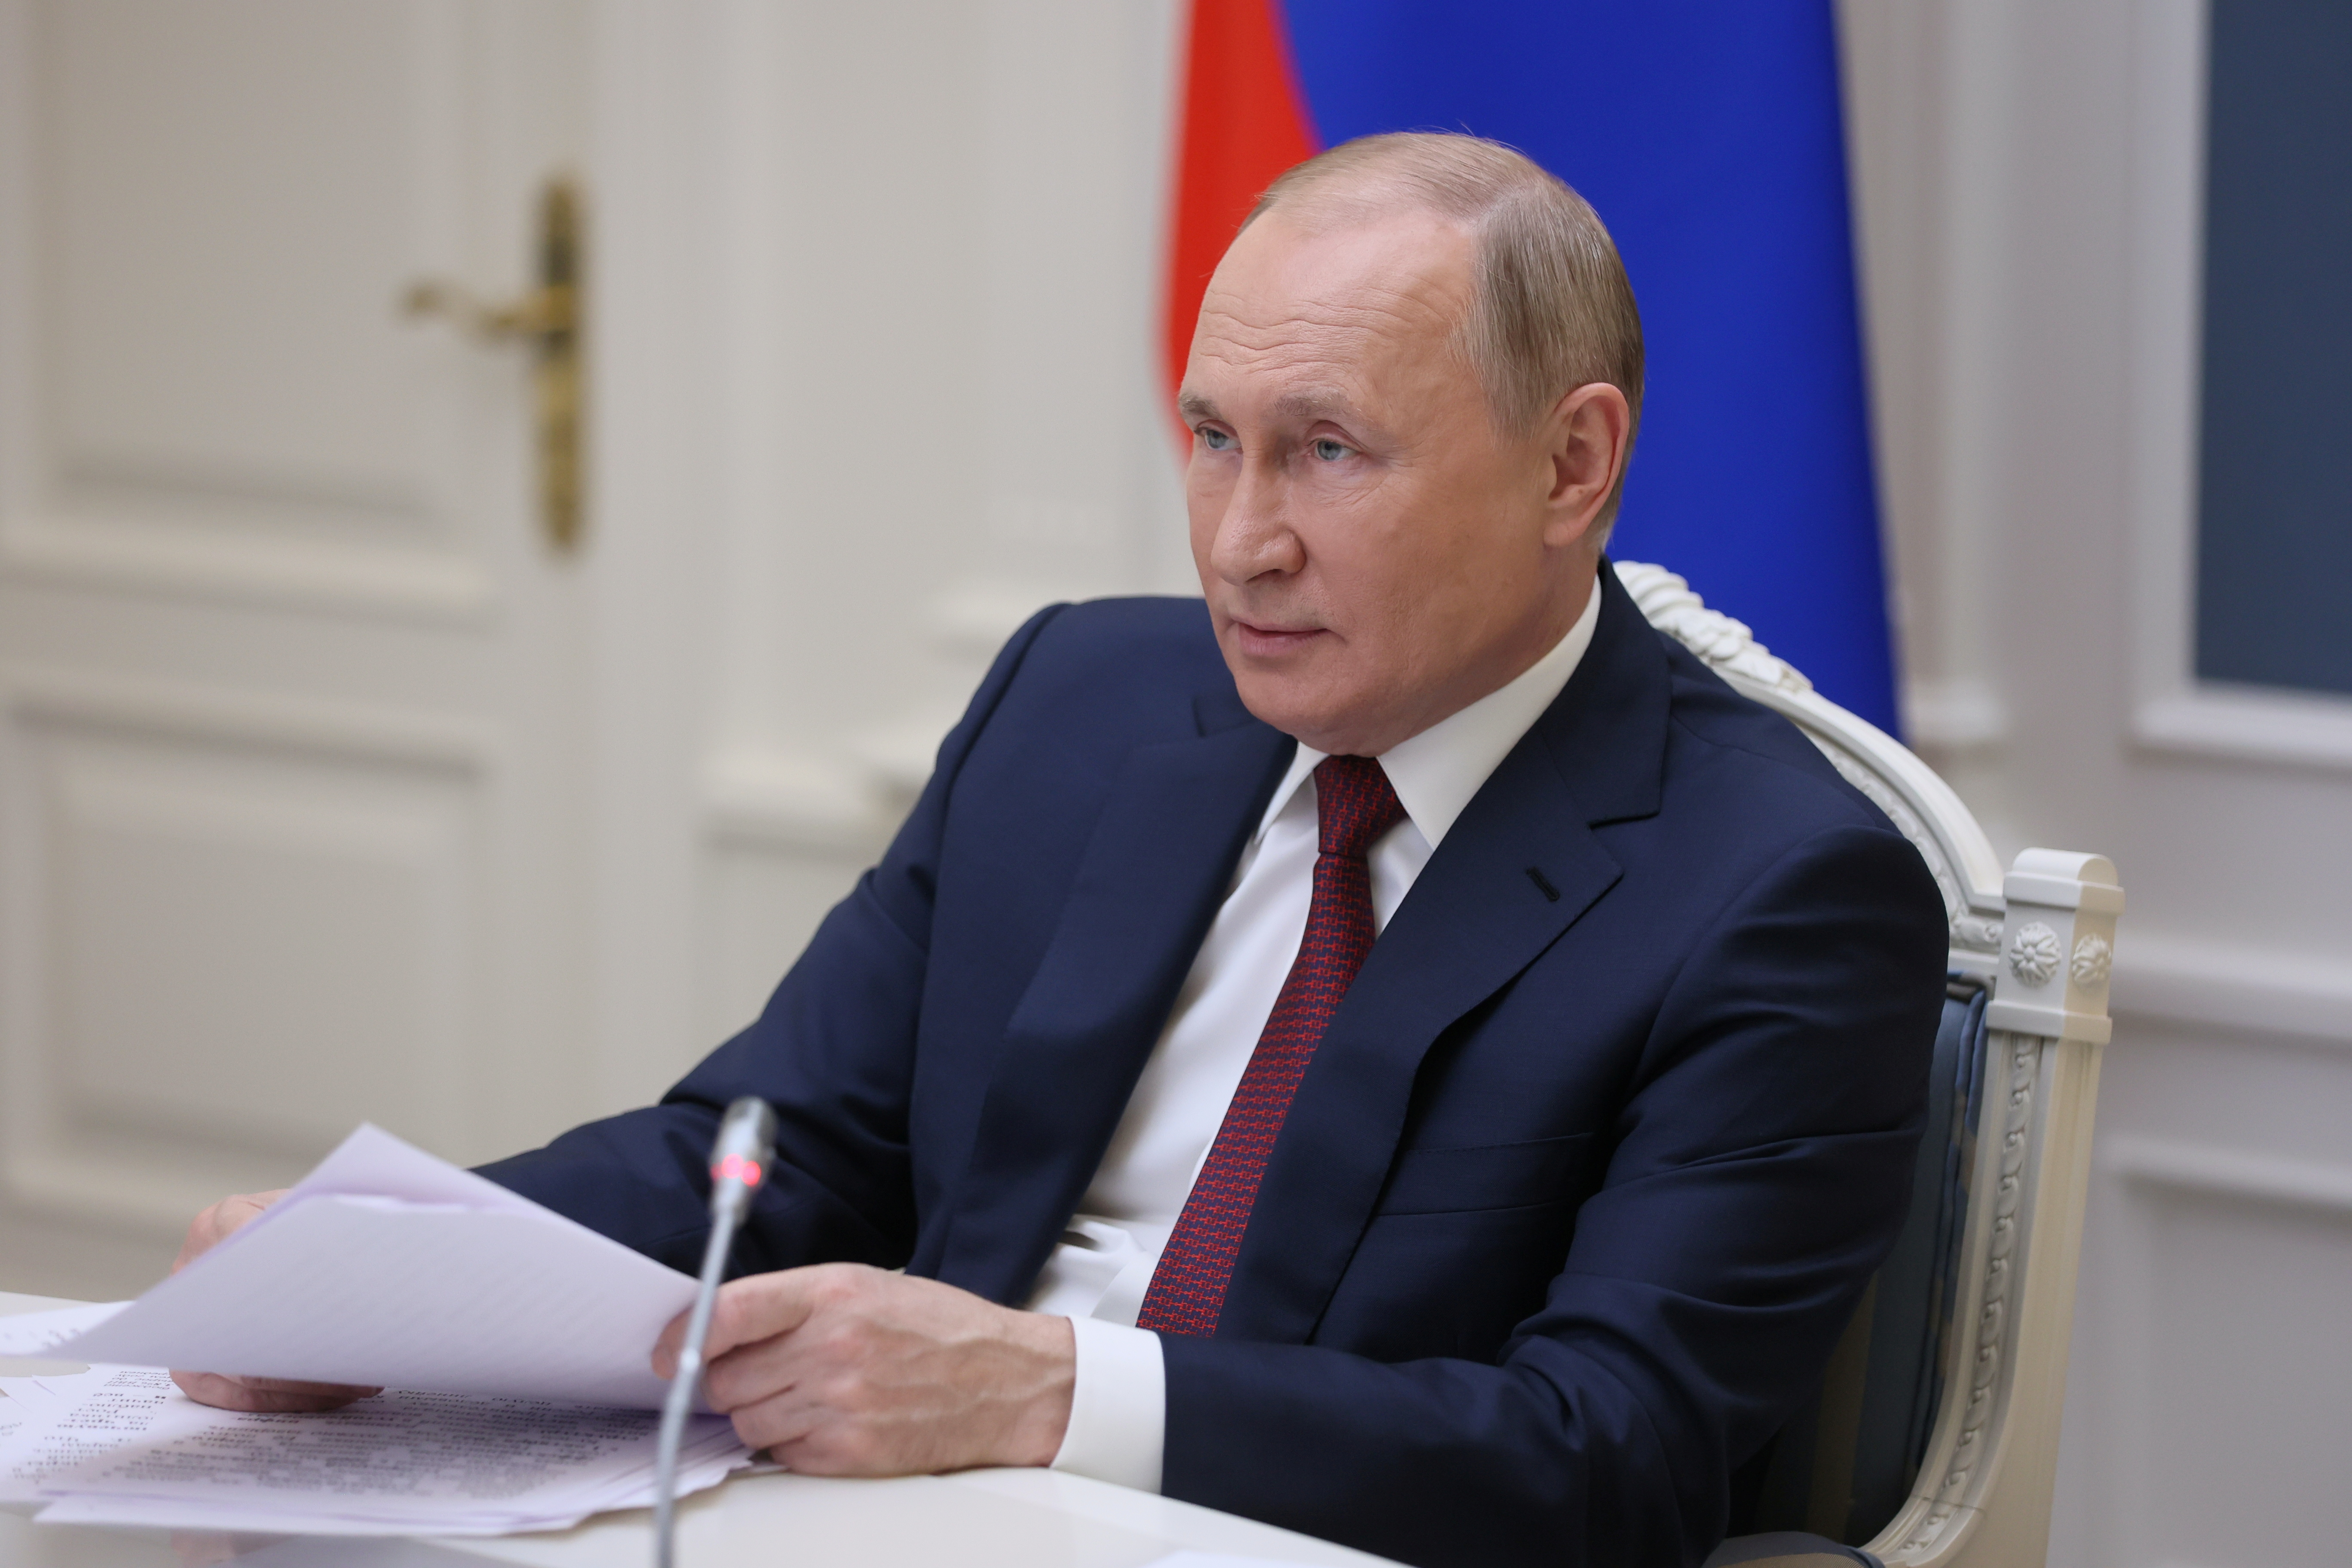 Russian President Vladimir Putin attends a session of the VTB Capital Investment Forum 